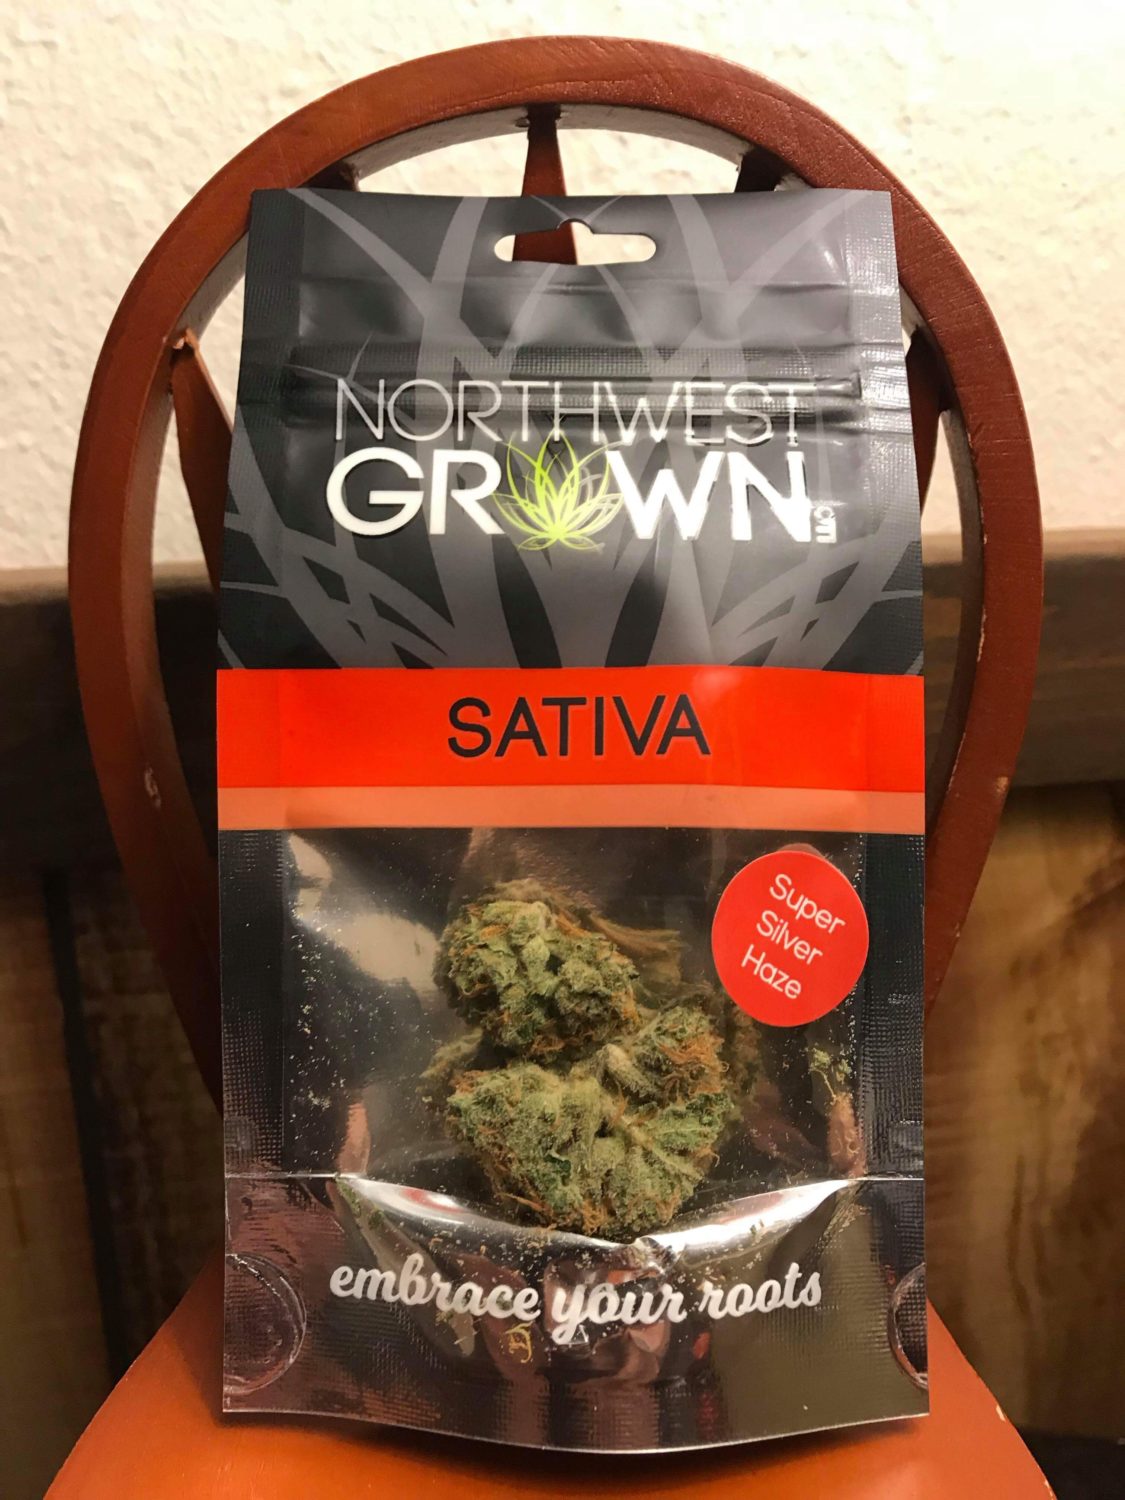 A Real Review of Northwest Grown’s Super Silver Haze